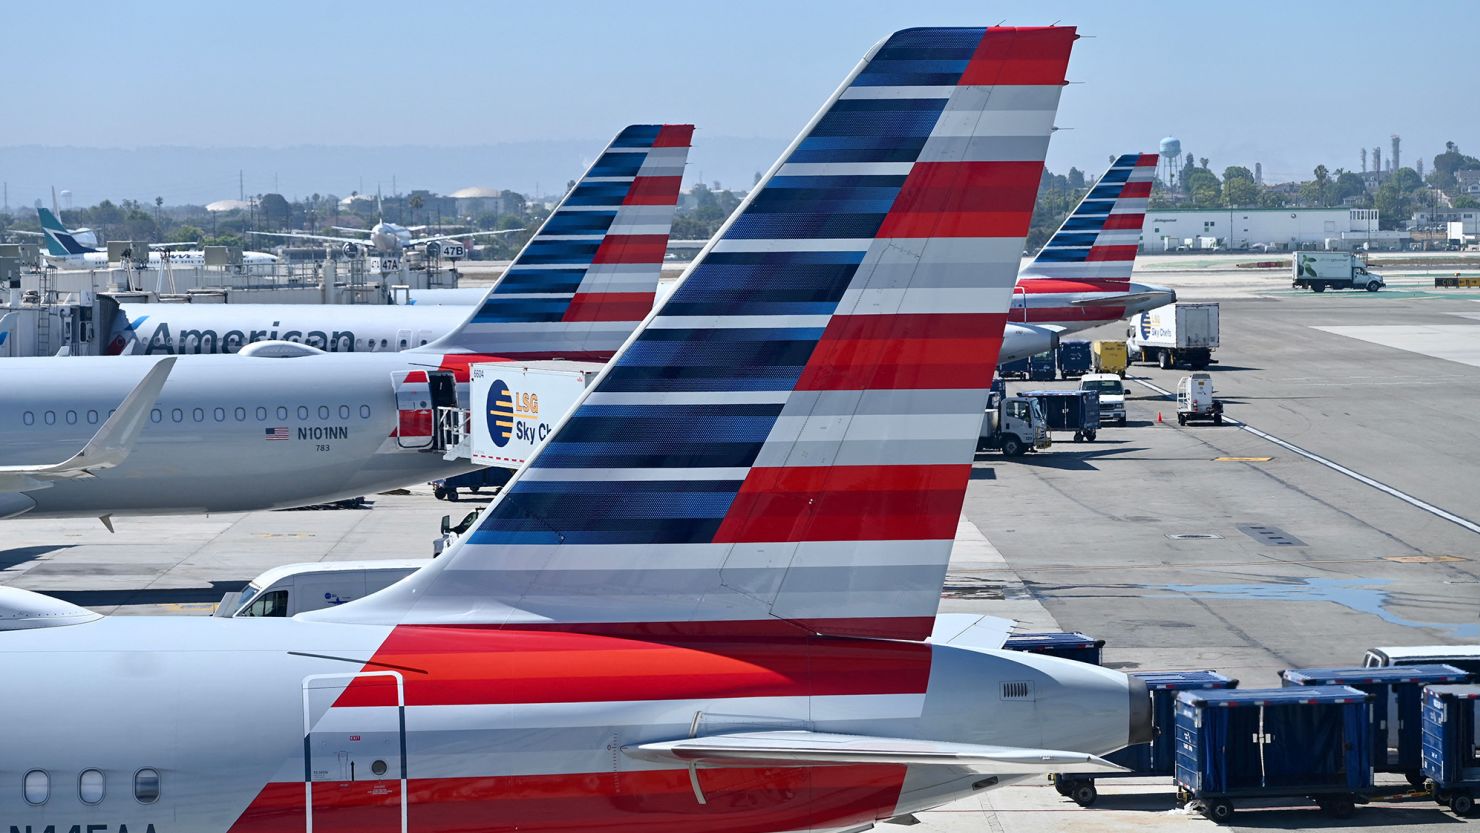 American Airlines planes sit at the gate at Los Angeles International Airport (LAX) in Los Angeles, California, on July 26, 2023. (Photo by Daniel SLIM / AFP) (Photo by DANIEL SLIM/AFP via Getty Images)